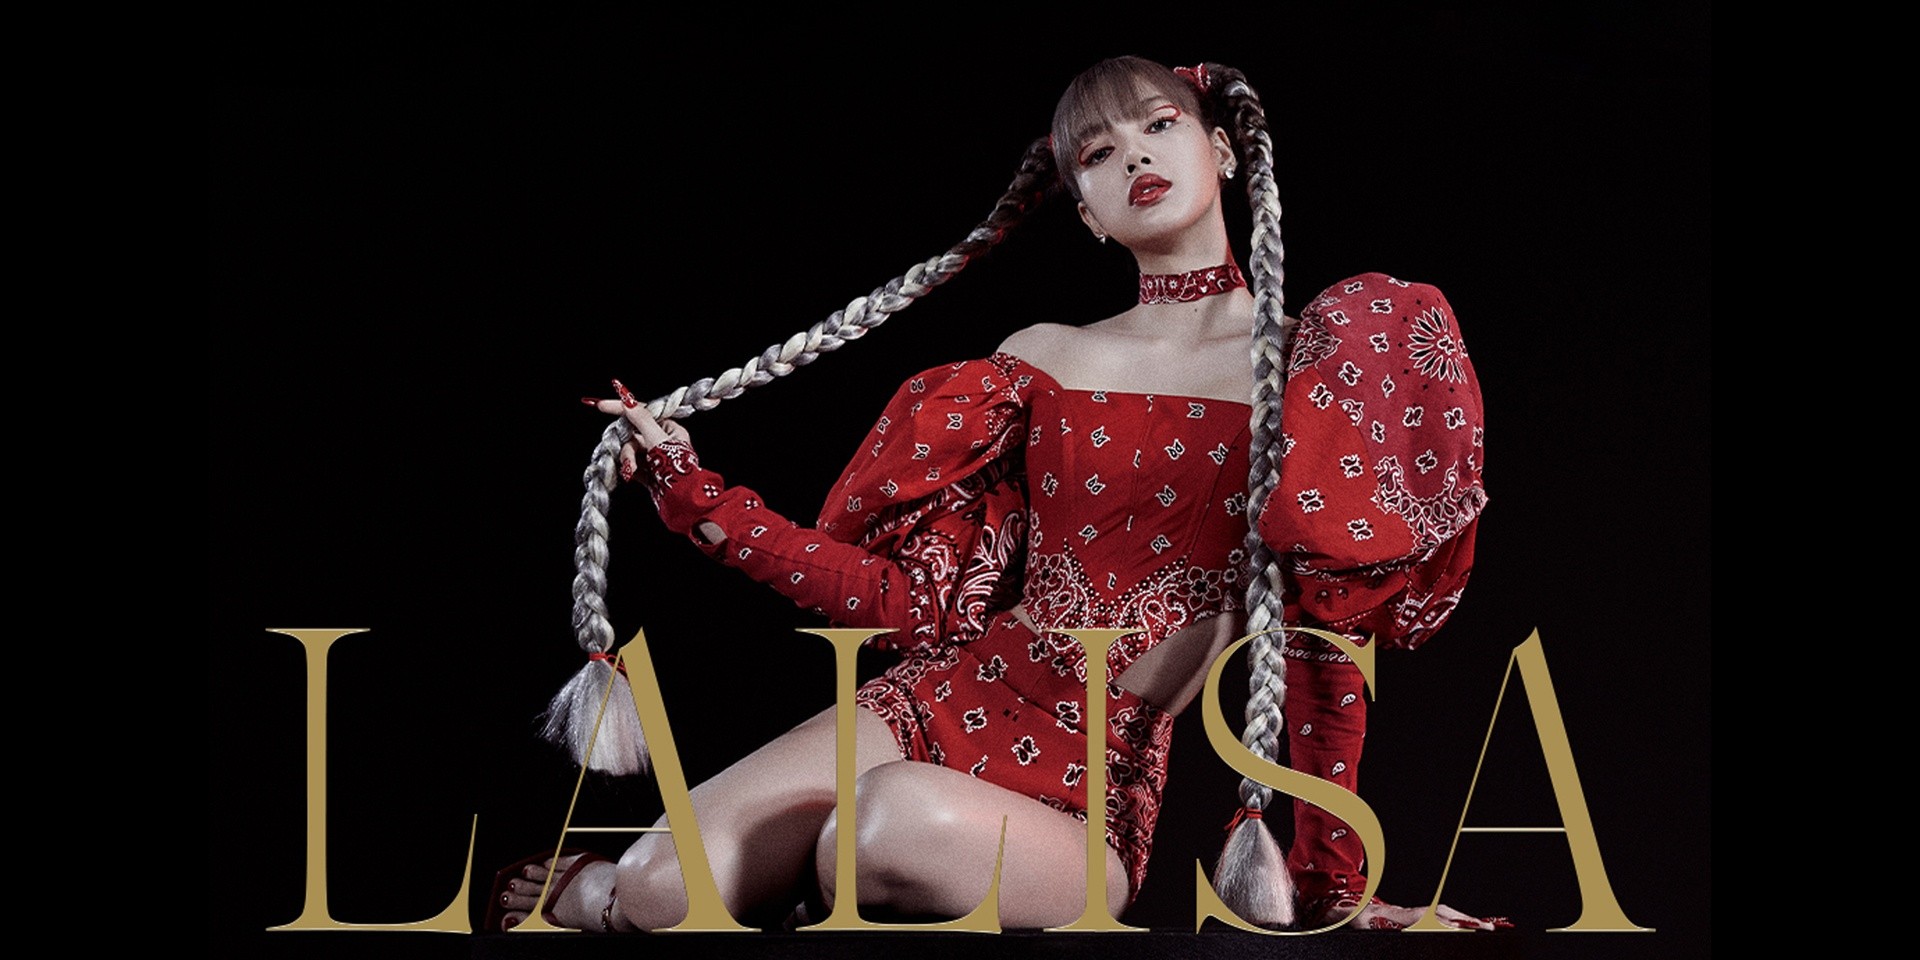 BLACKPINK's Lisa announces solo debut 'LALISA', dropping this September